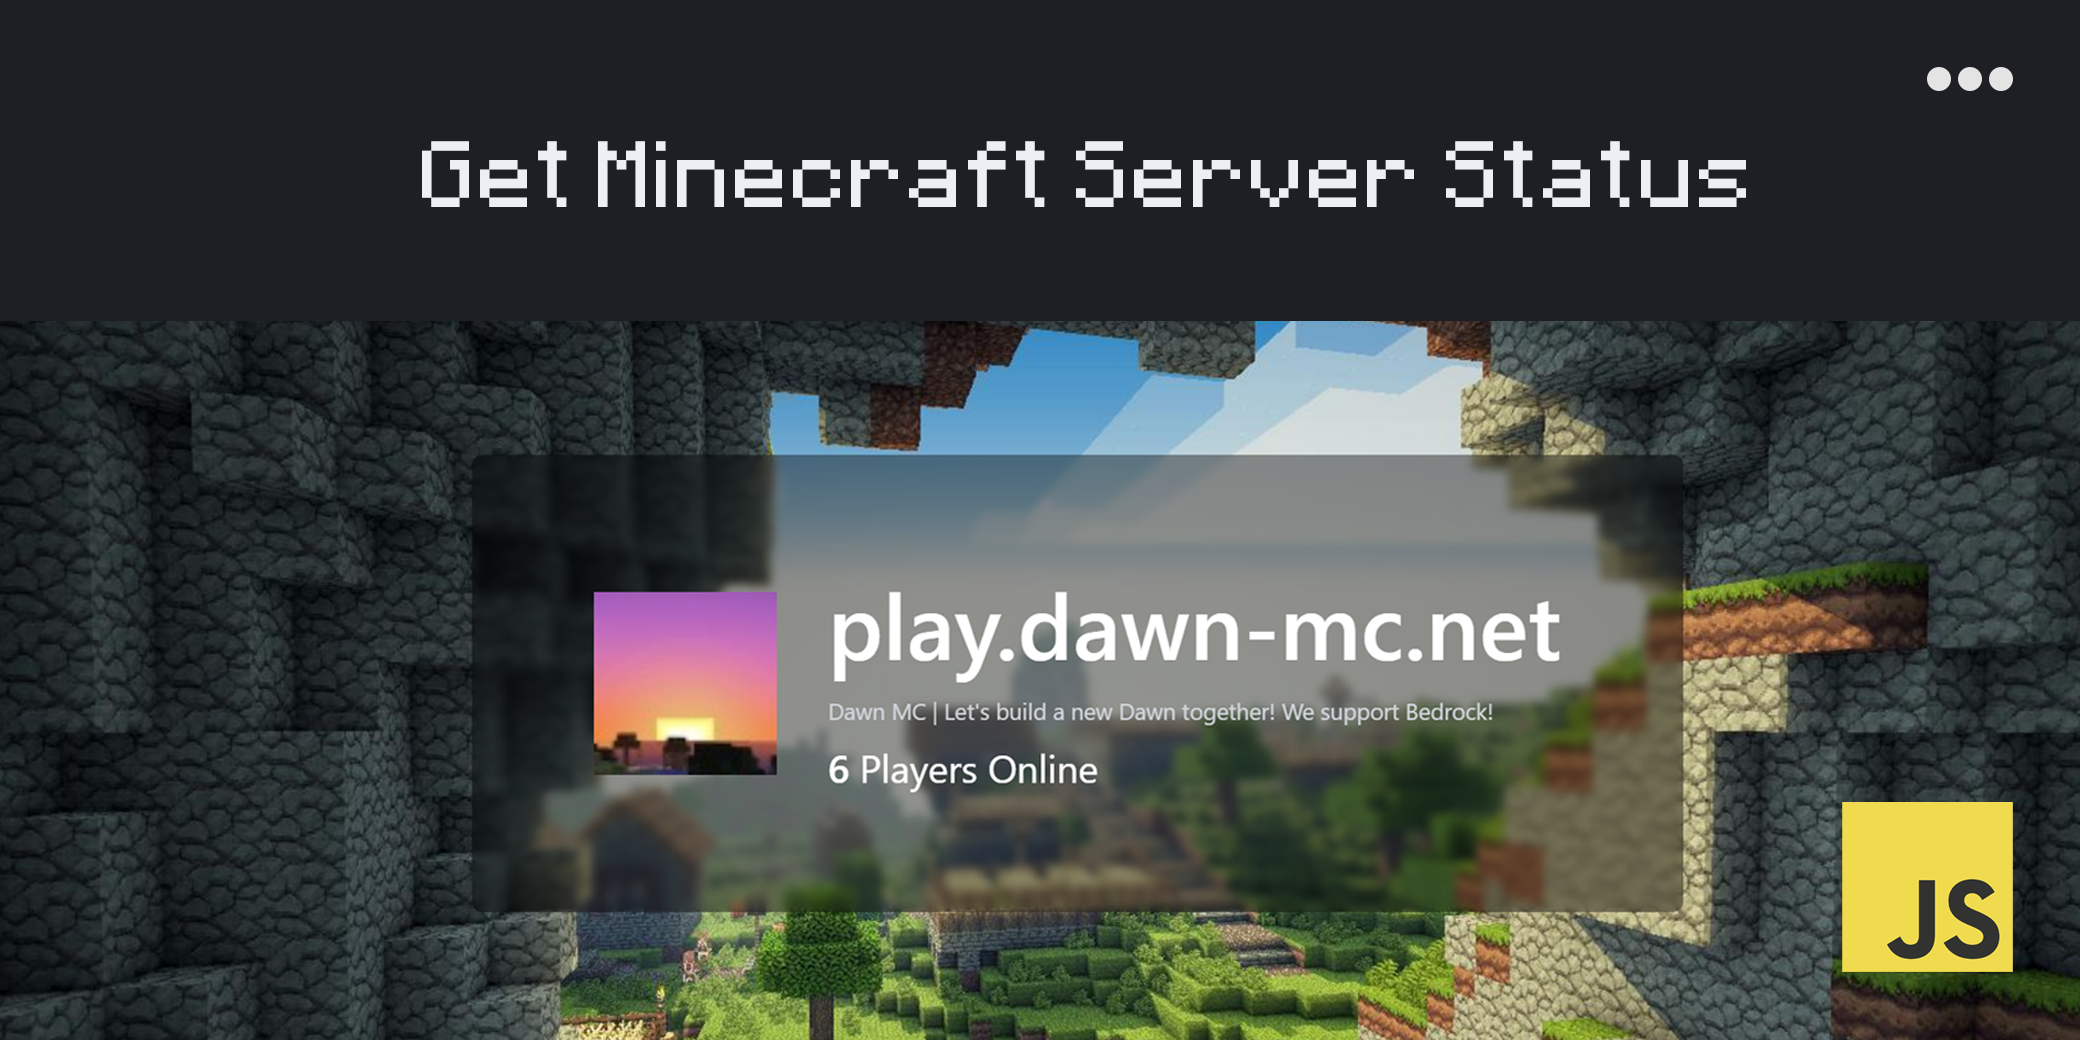 to get a Minecraft Server's player and status using